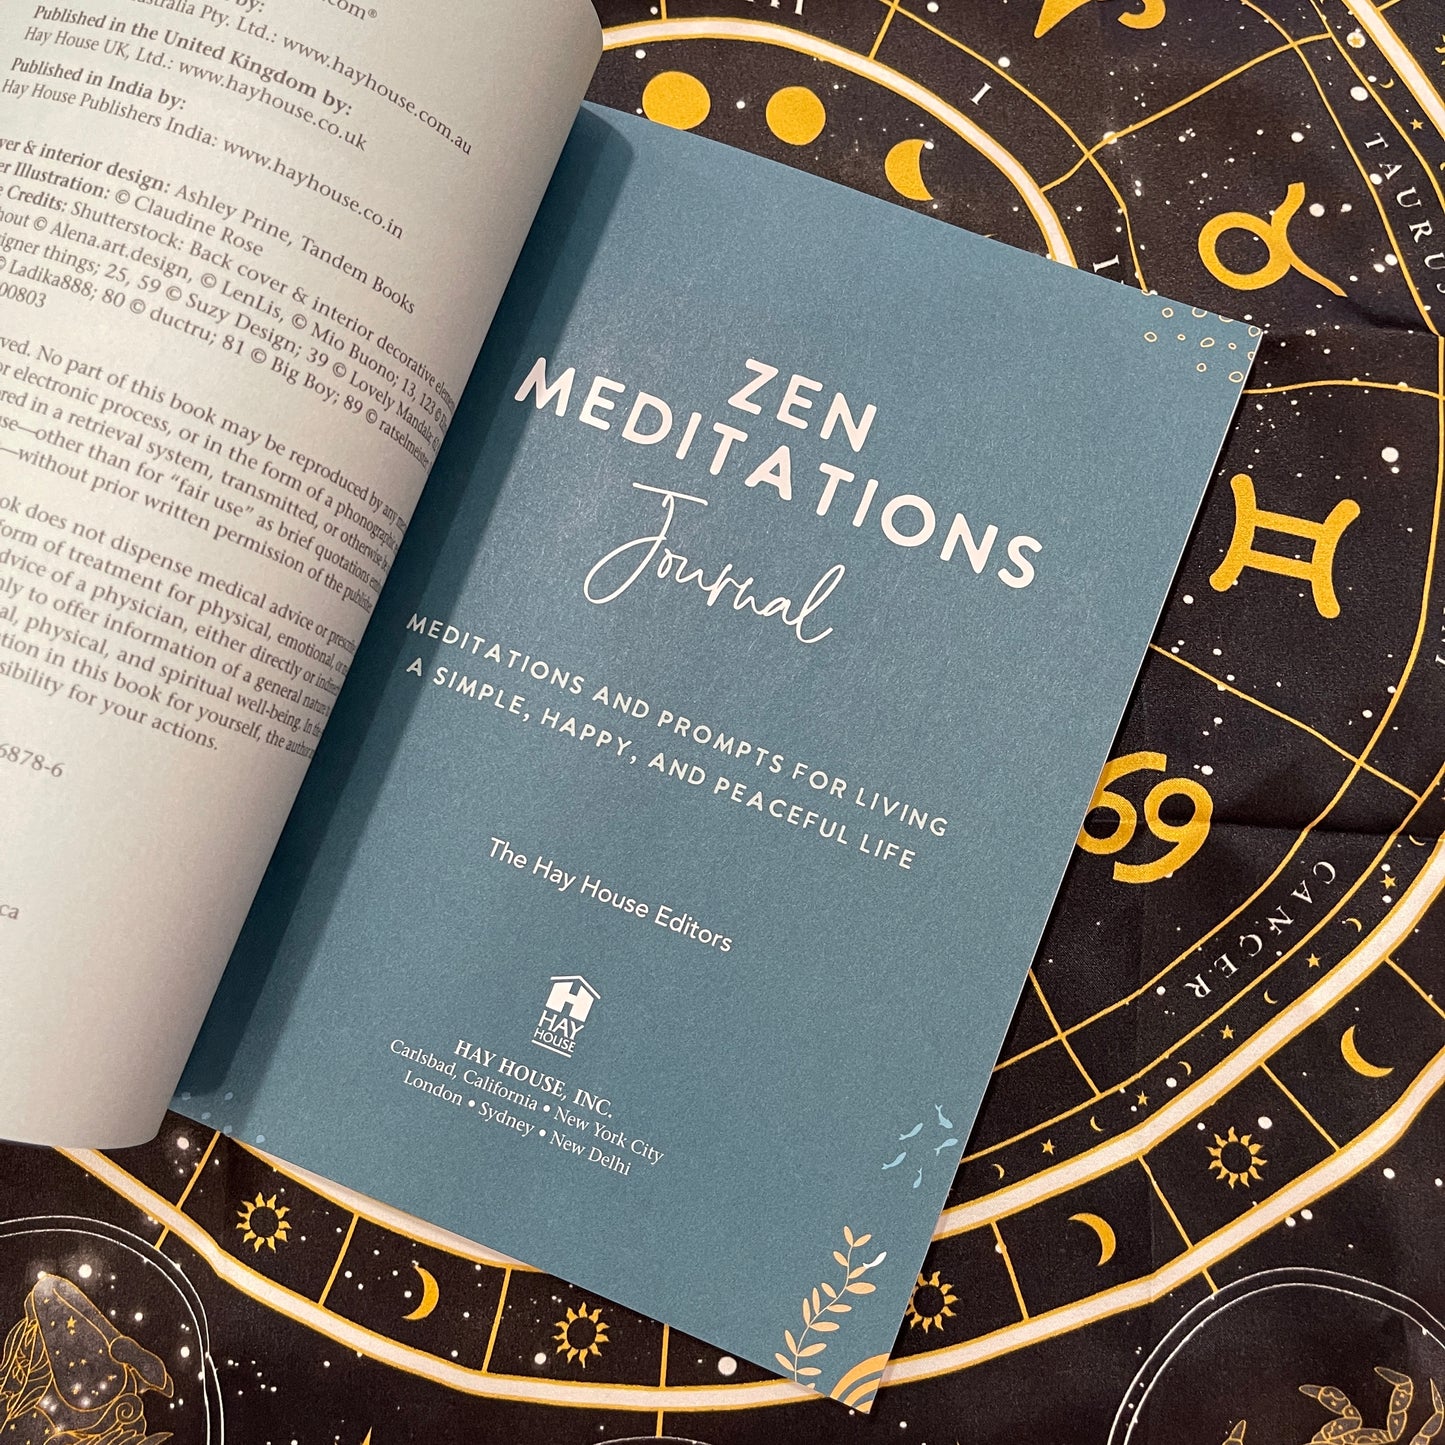 Zen Meditations Journal: Meditations & Prompts for Living a Simple, Happy & Peaceful Life